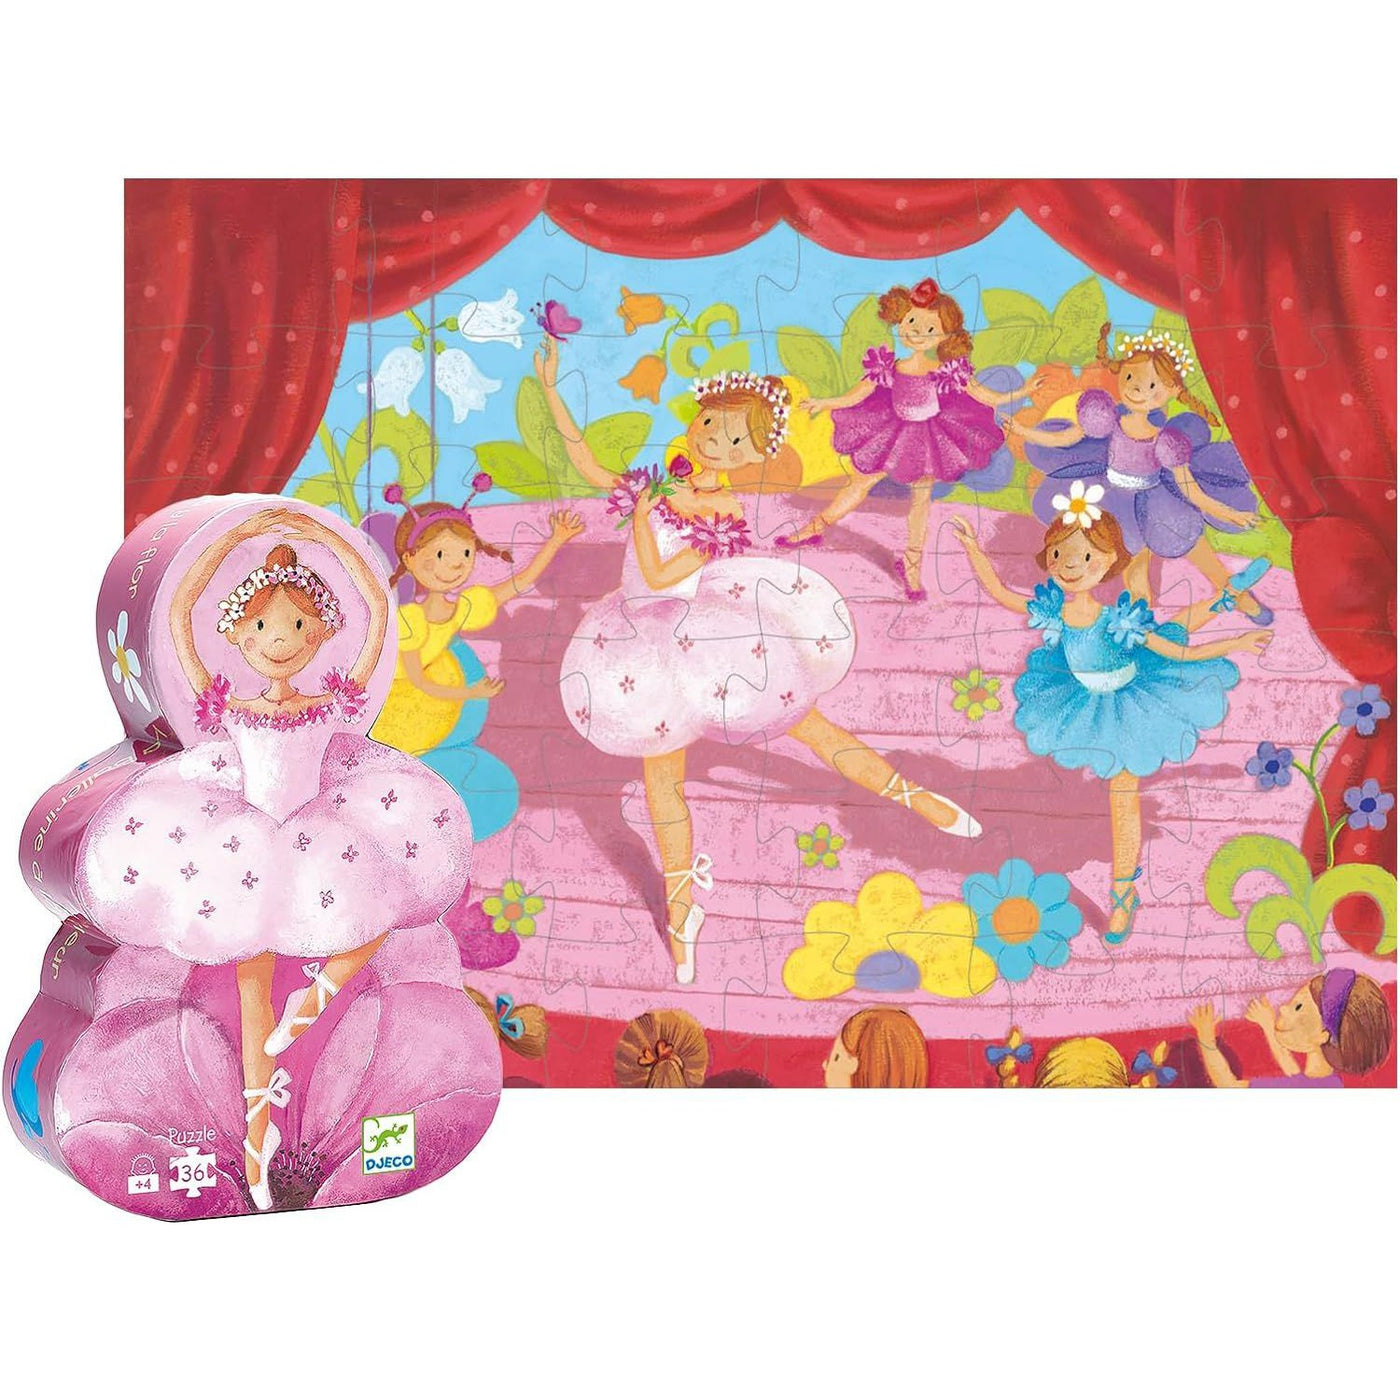 Ballerina with Flower Silhouette Puzzle - 36 Pieces